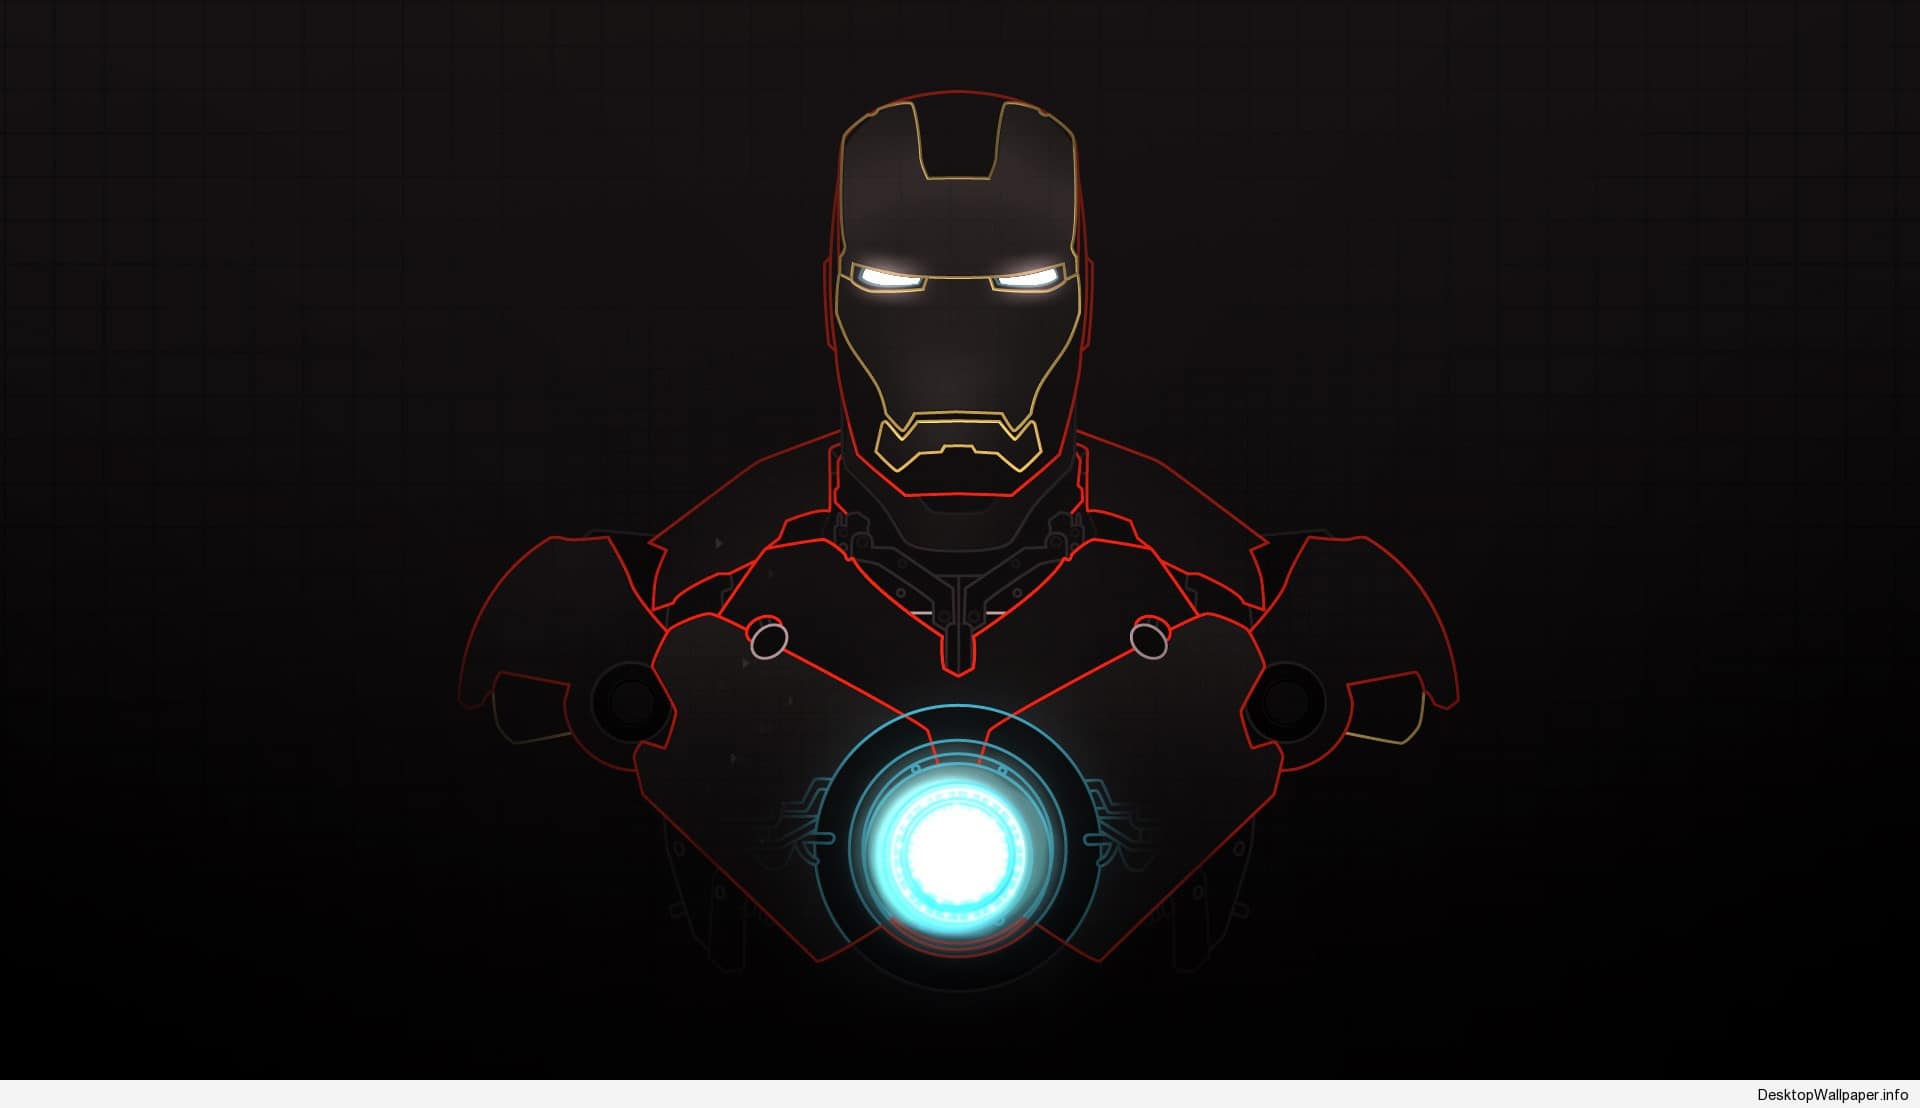 Iron Man Wallpapers For Pc Online Website, Save 43% | jlcatj.gob.mx